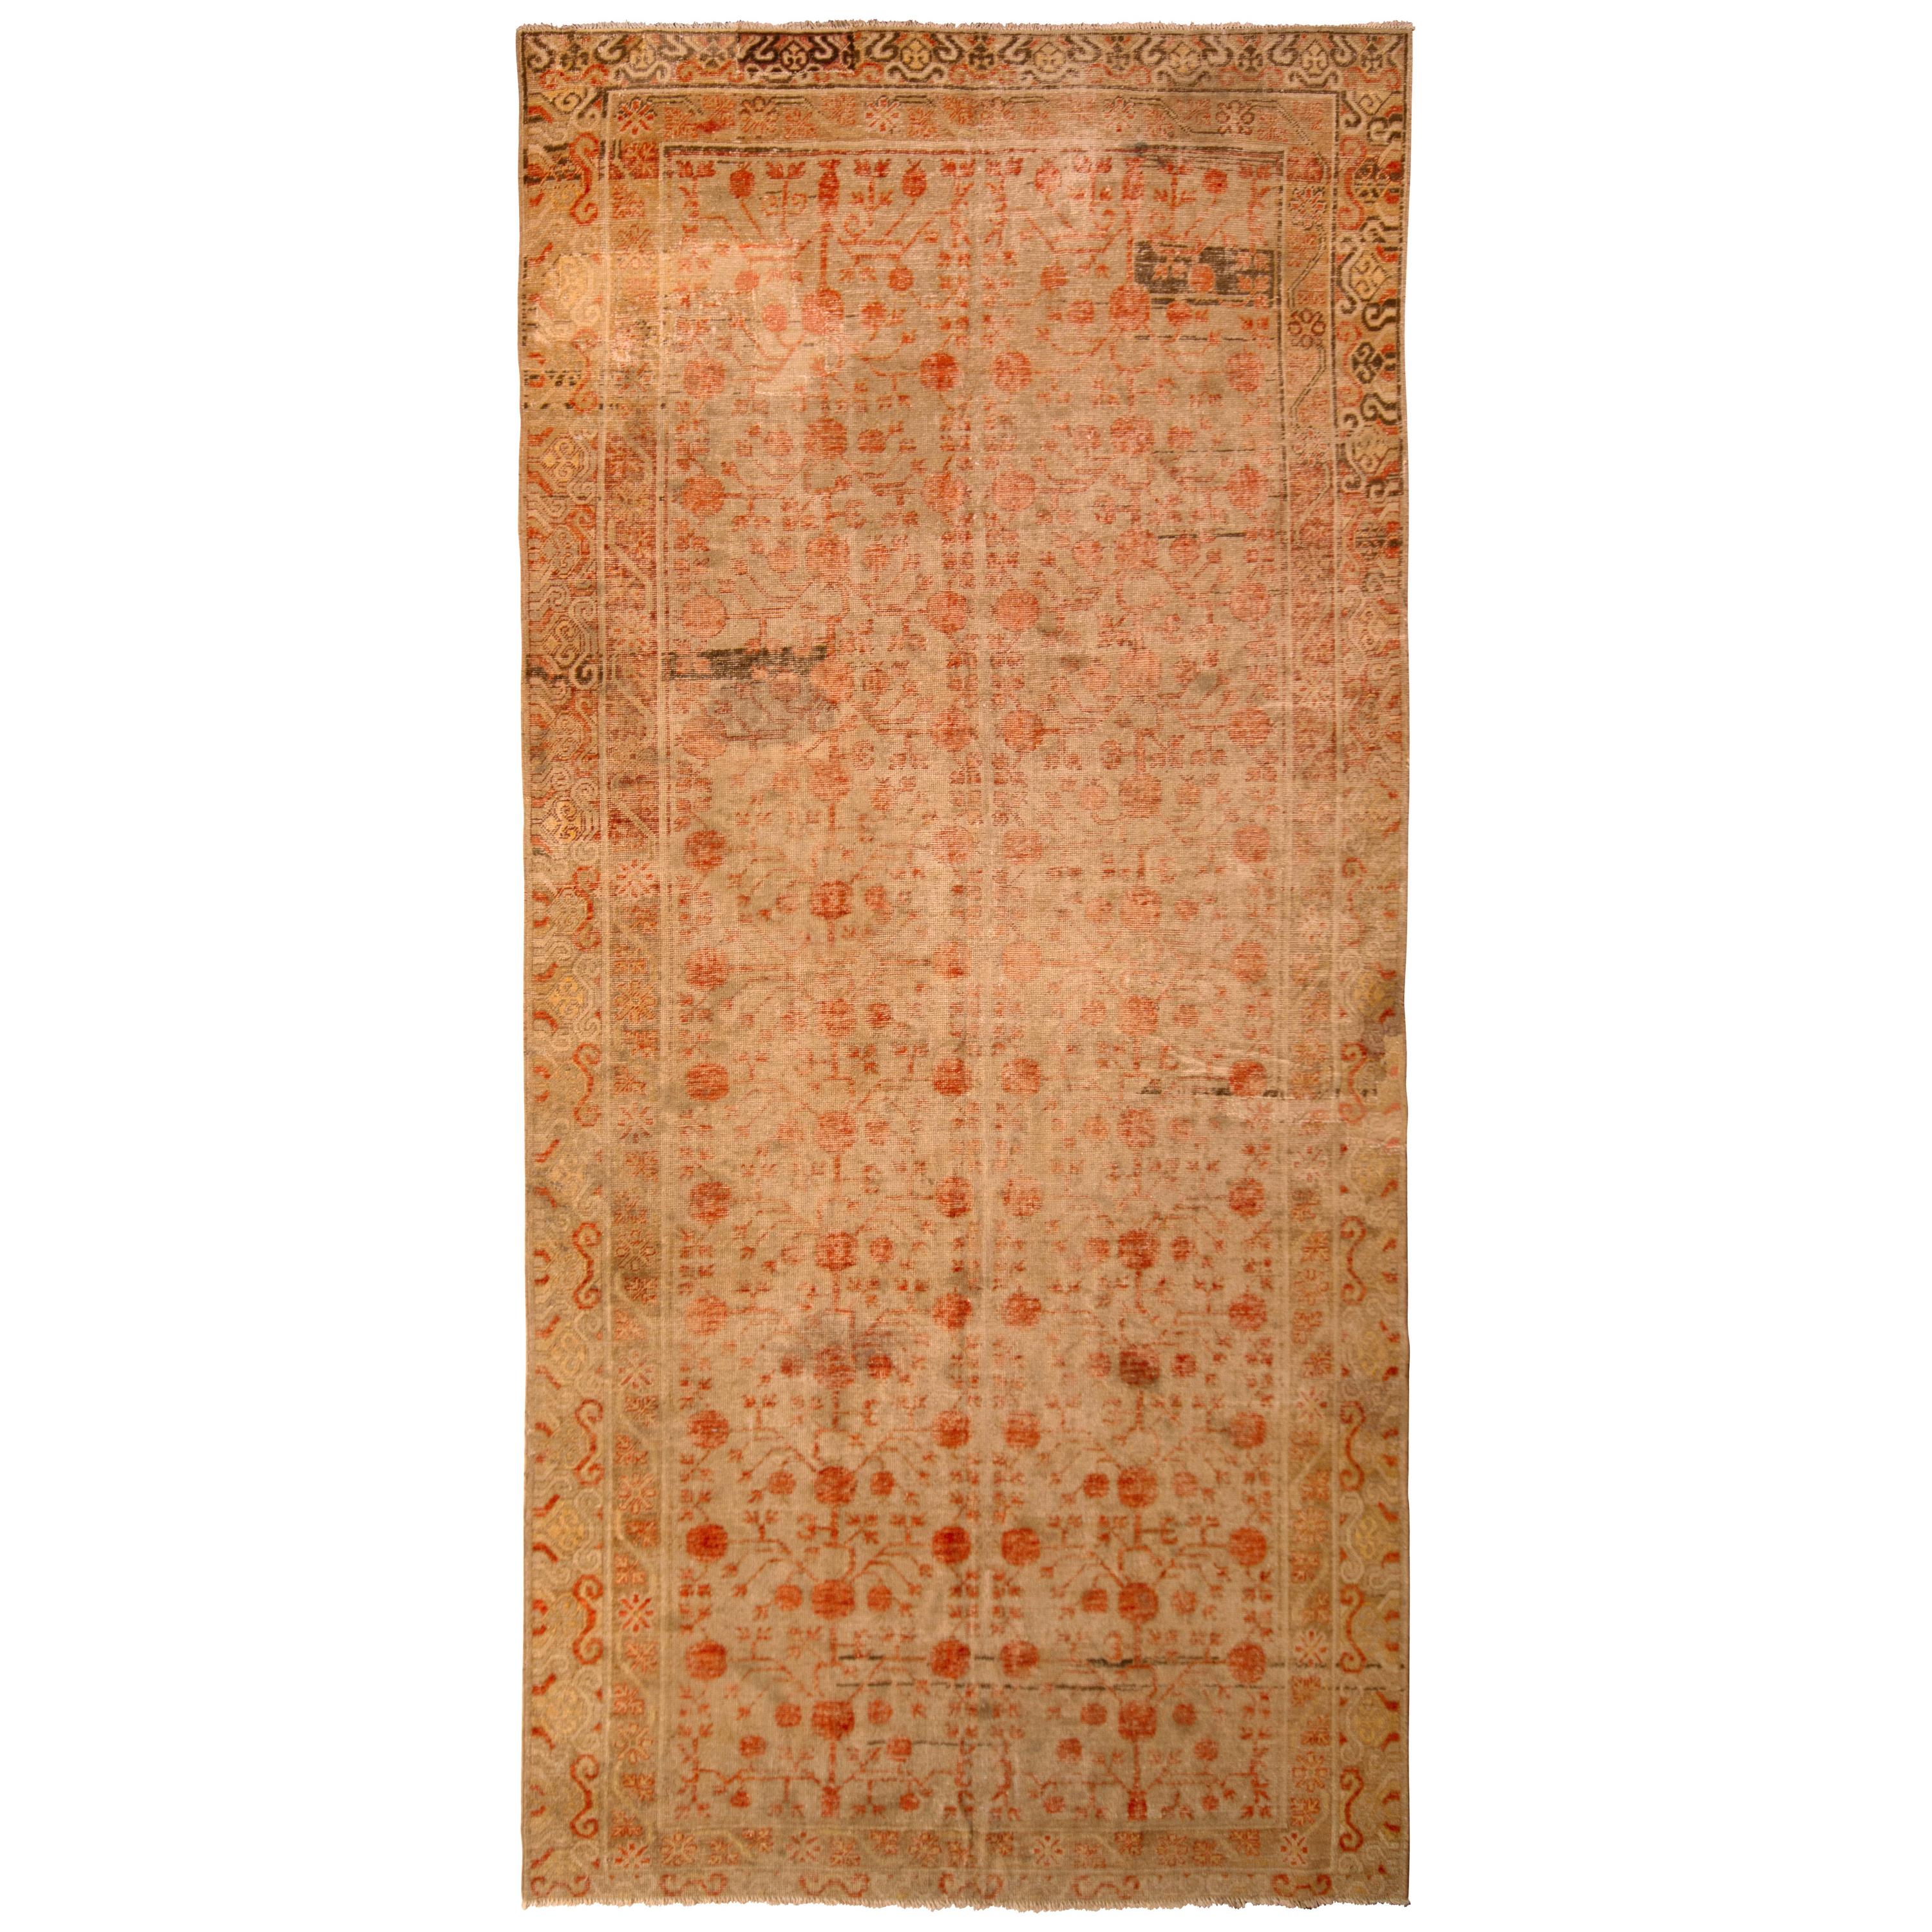 Hand Knotted Antique Khotan Rug Beige Brown with Red Pomegranate Pattern